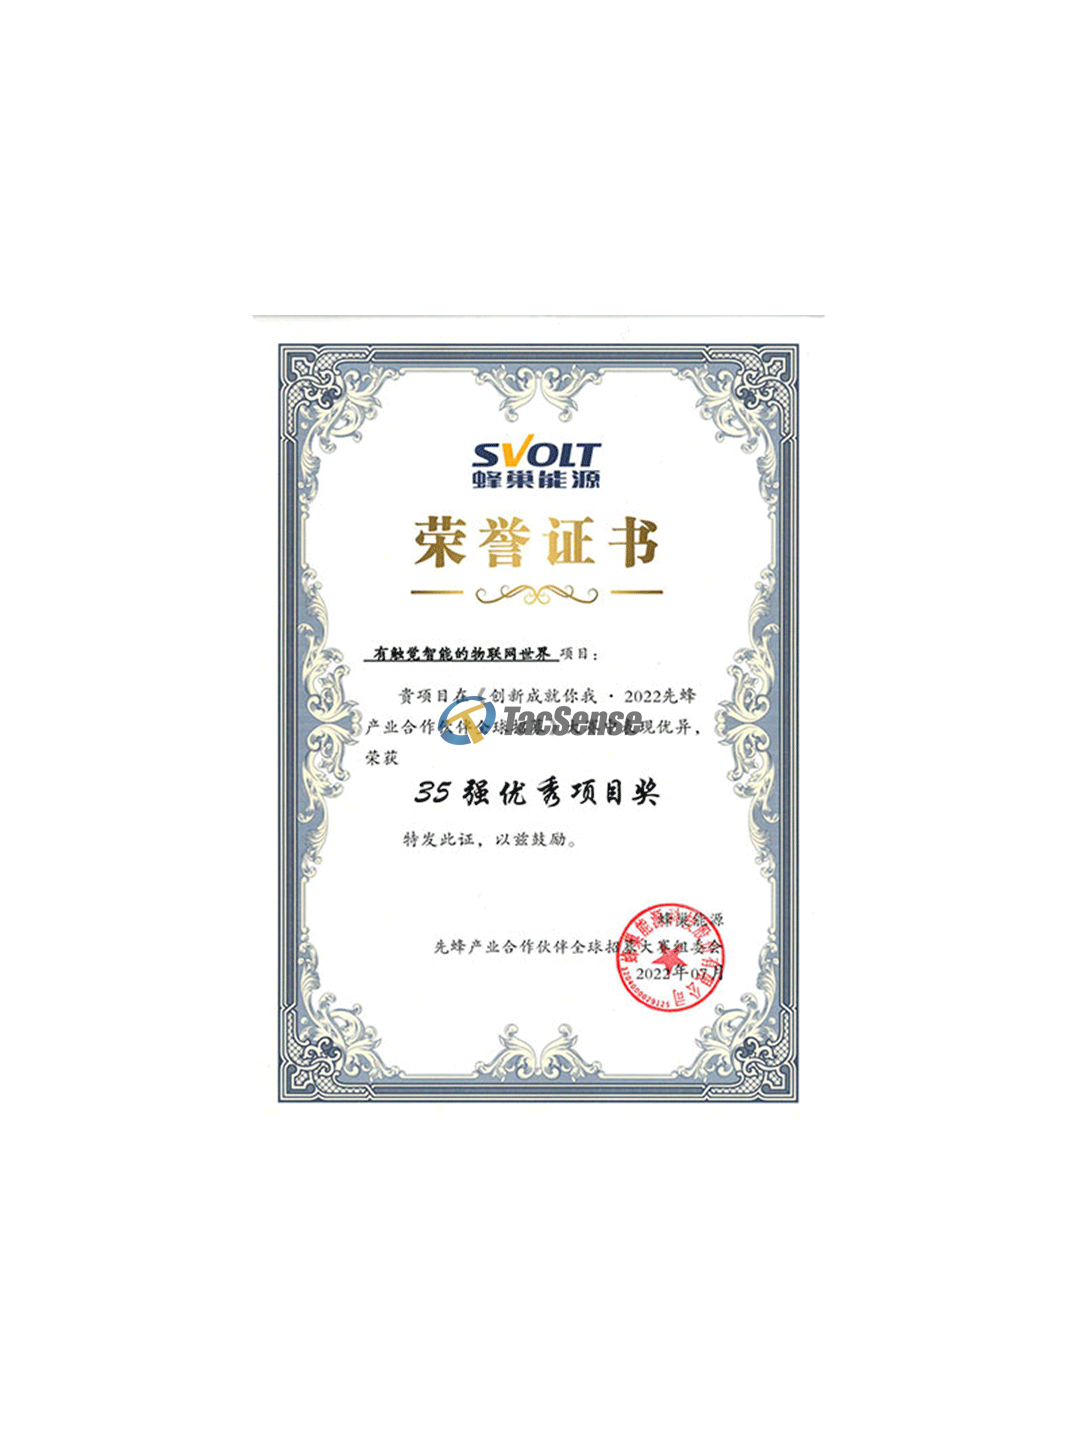 Honeycomb Energy Top 35 Excellent Project Award